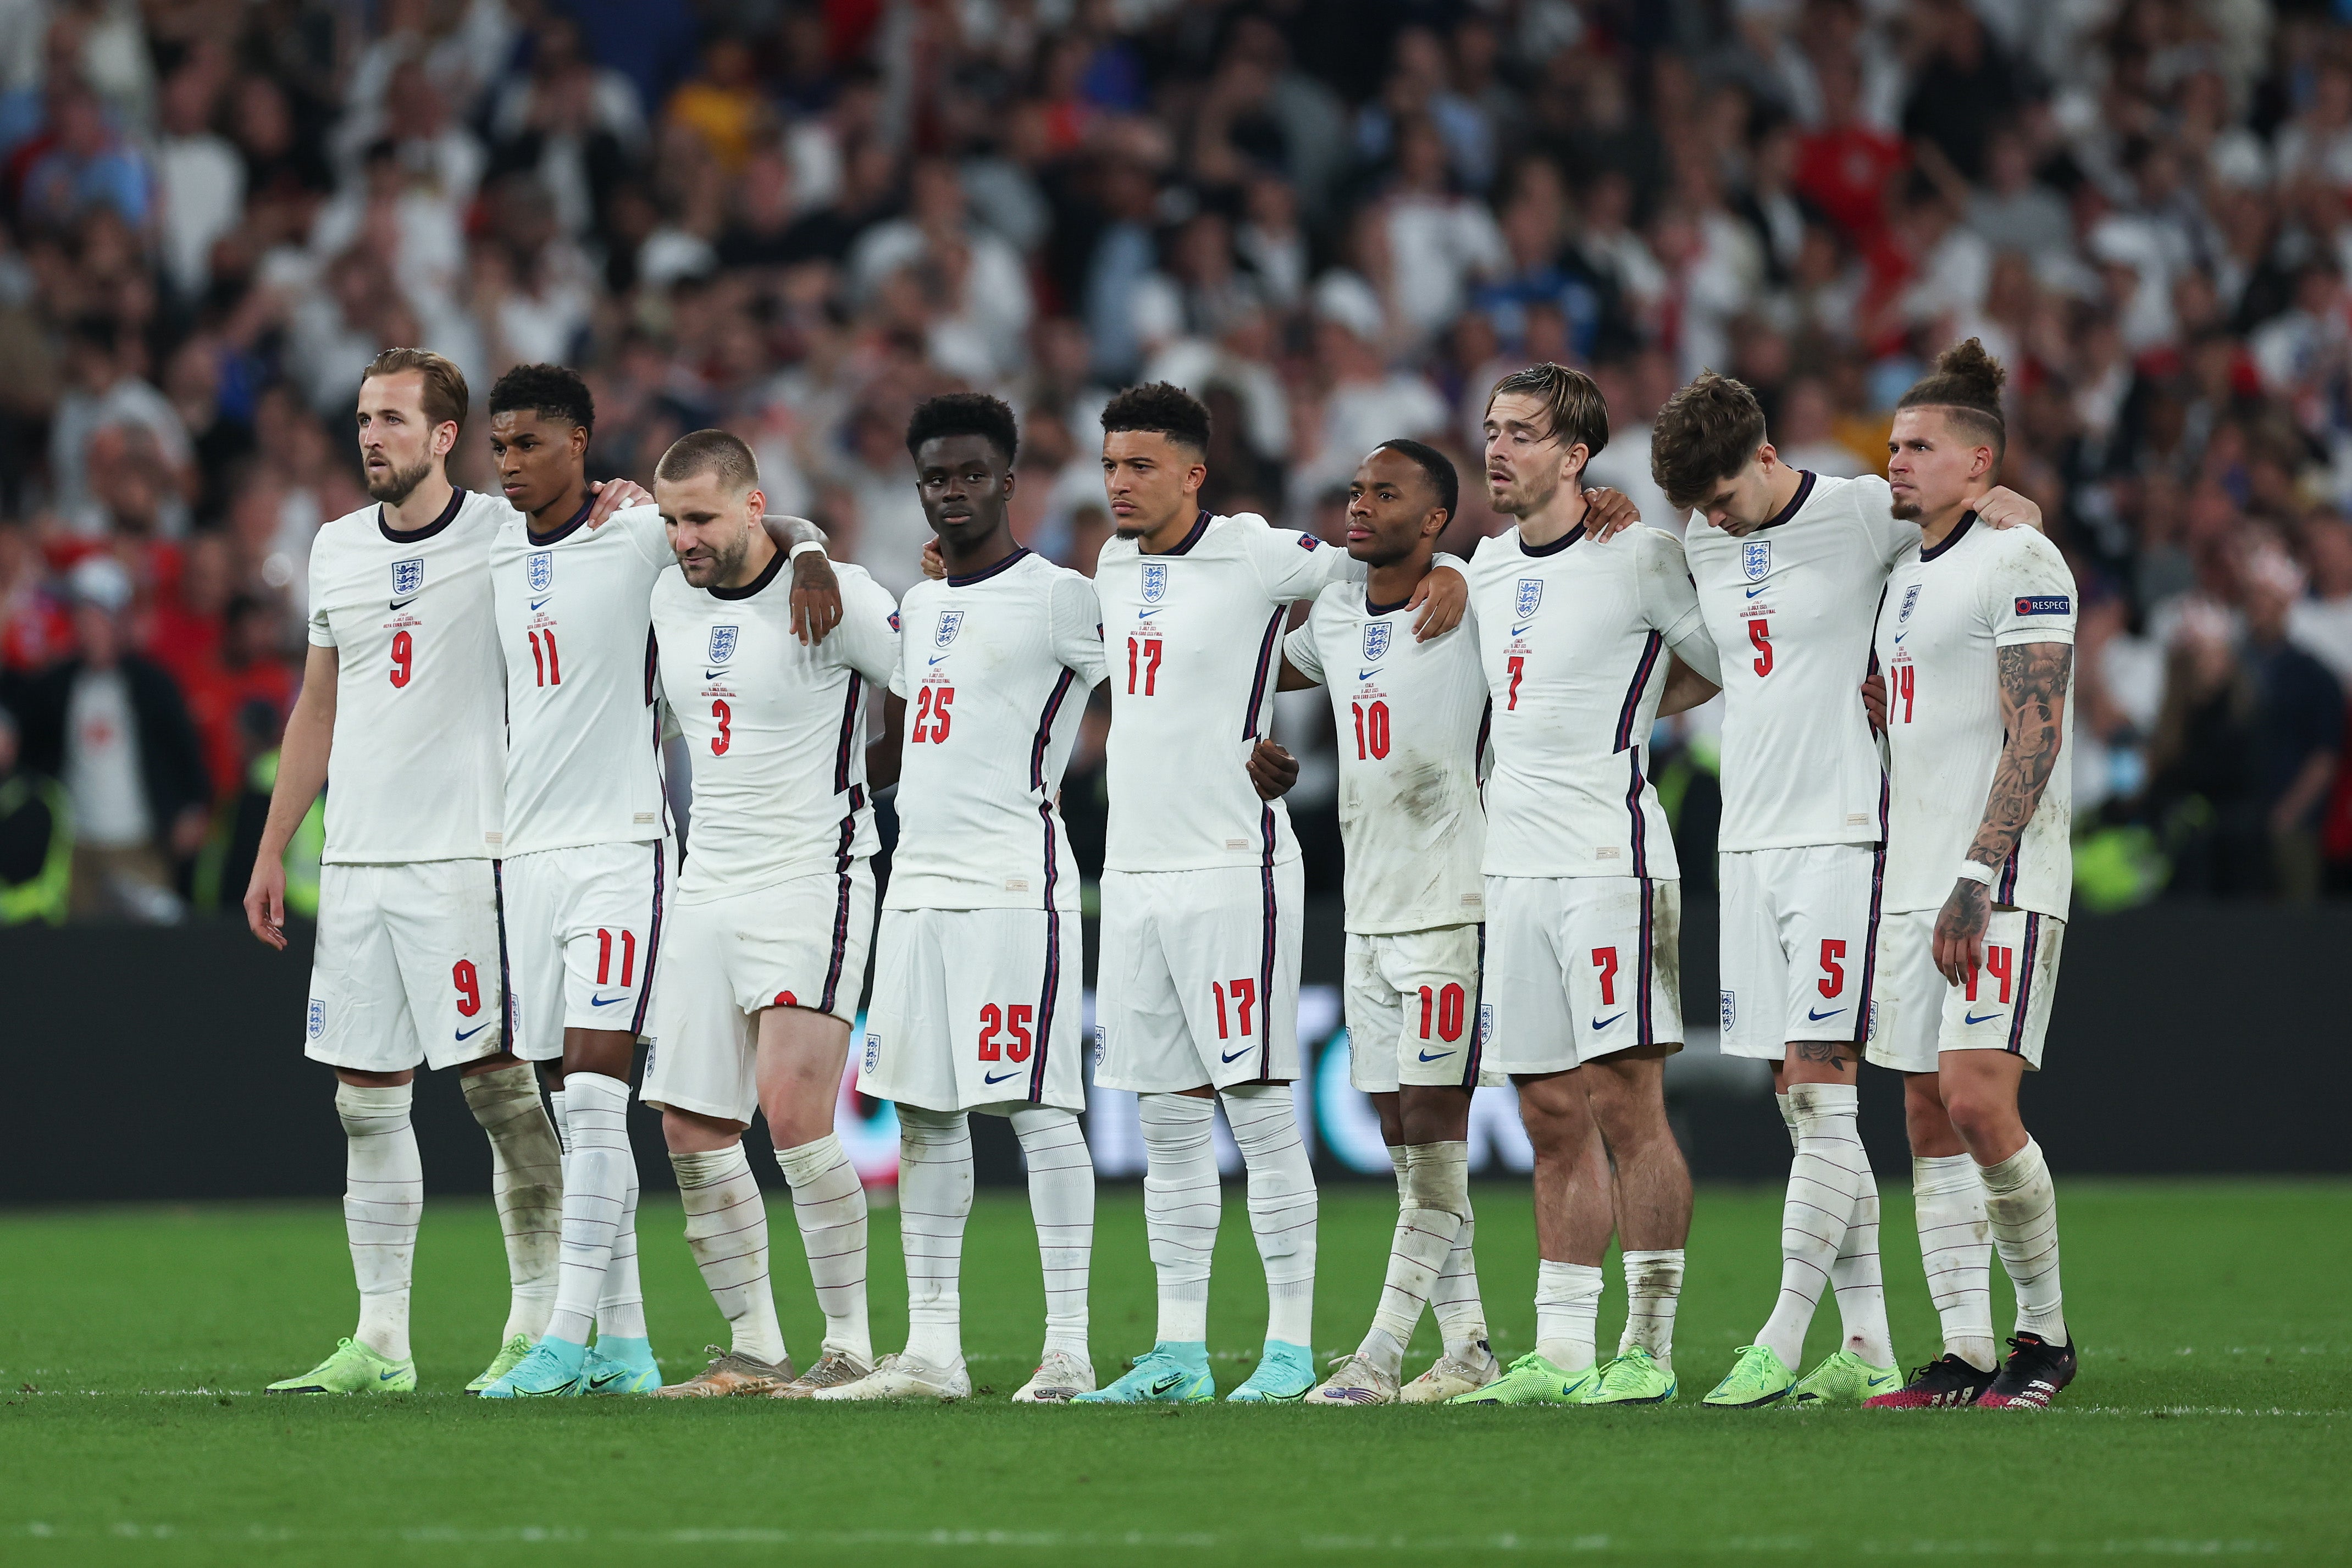 Members of the England football team stand together in the final of the Euro 2020 final against Italy on 11 July 2021